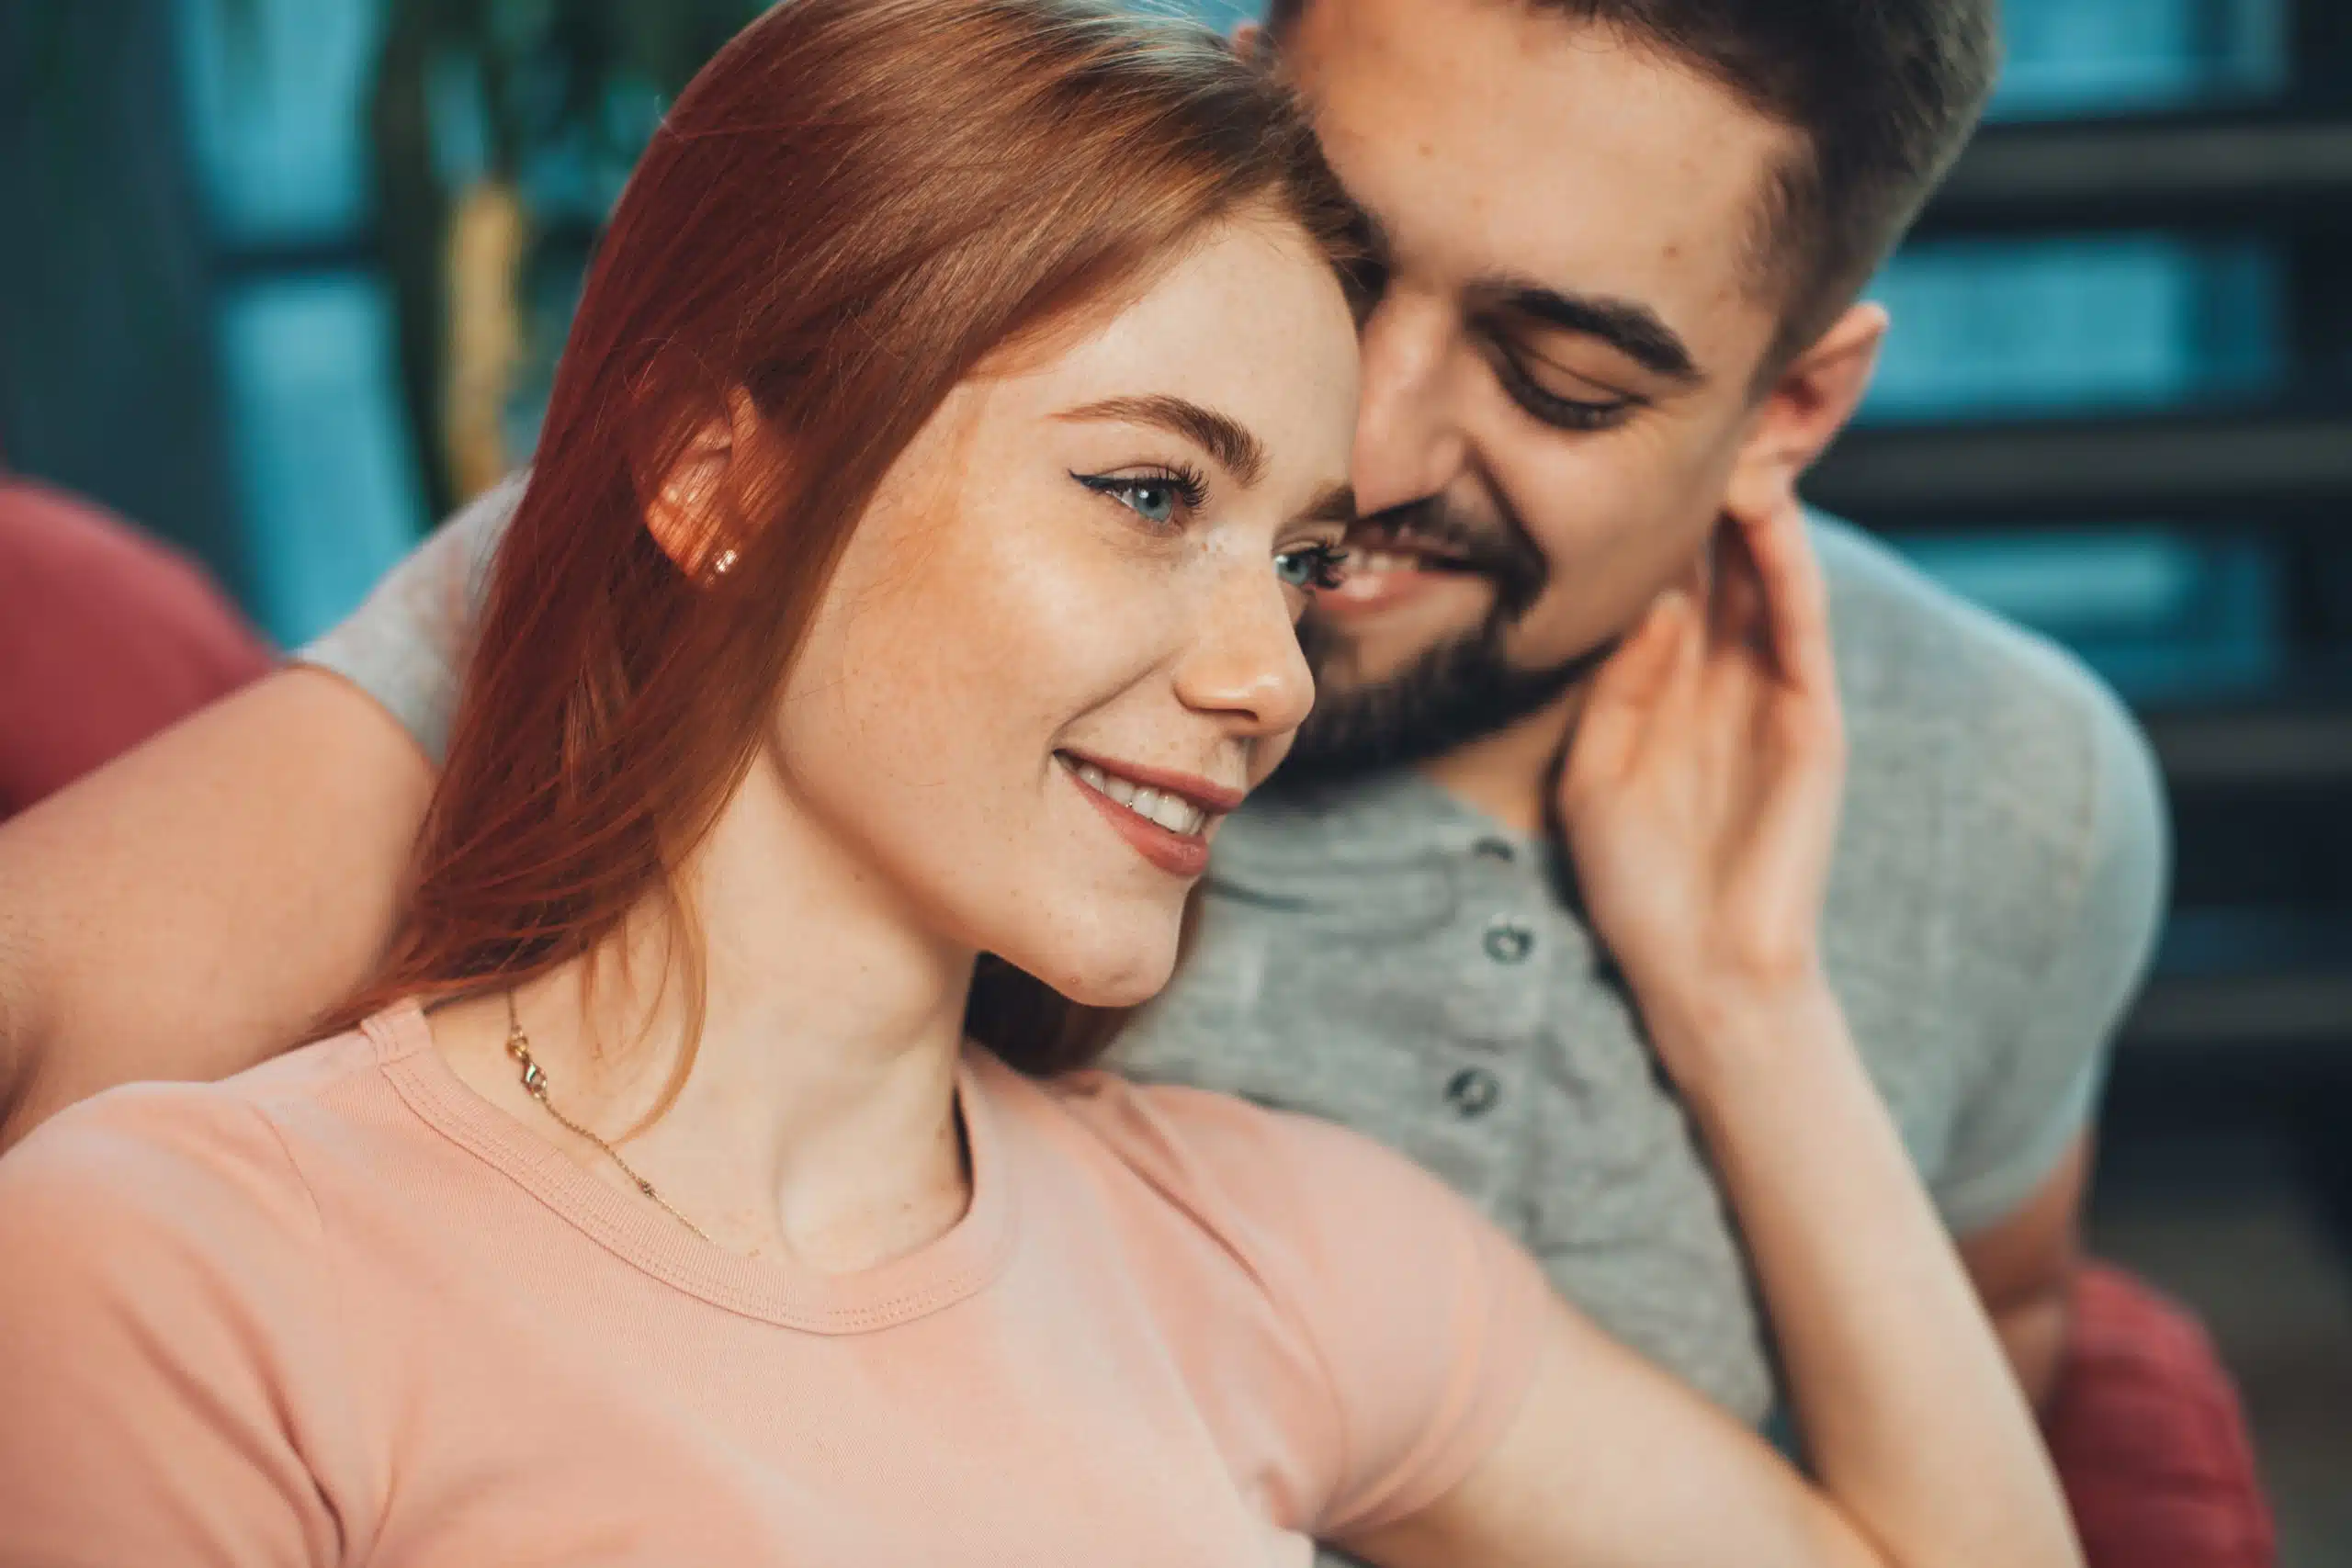 Attractive couple sitting on the couch on the weekend, freckled woman with red hair touching her husband's face.